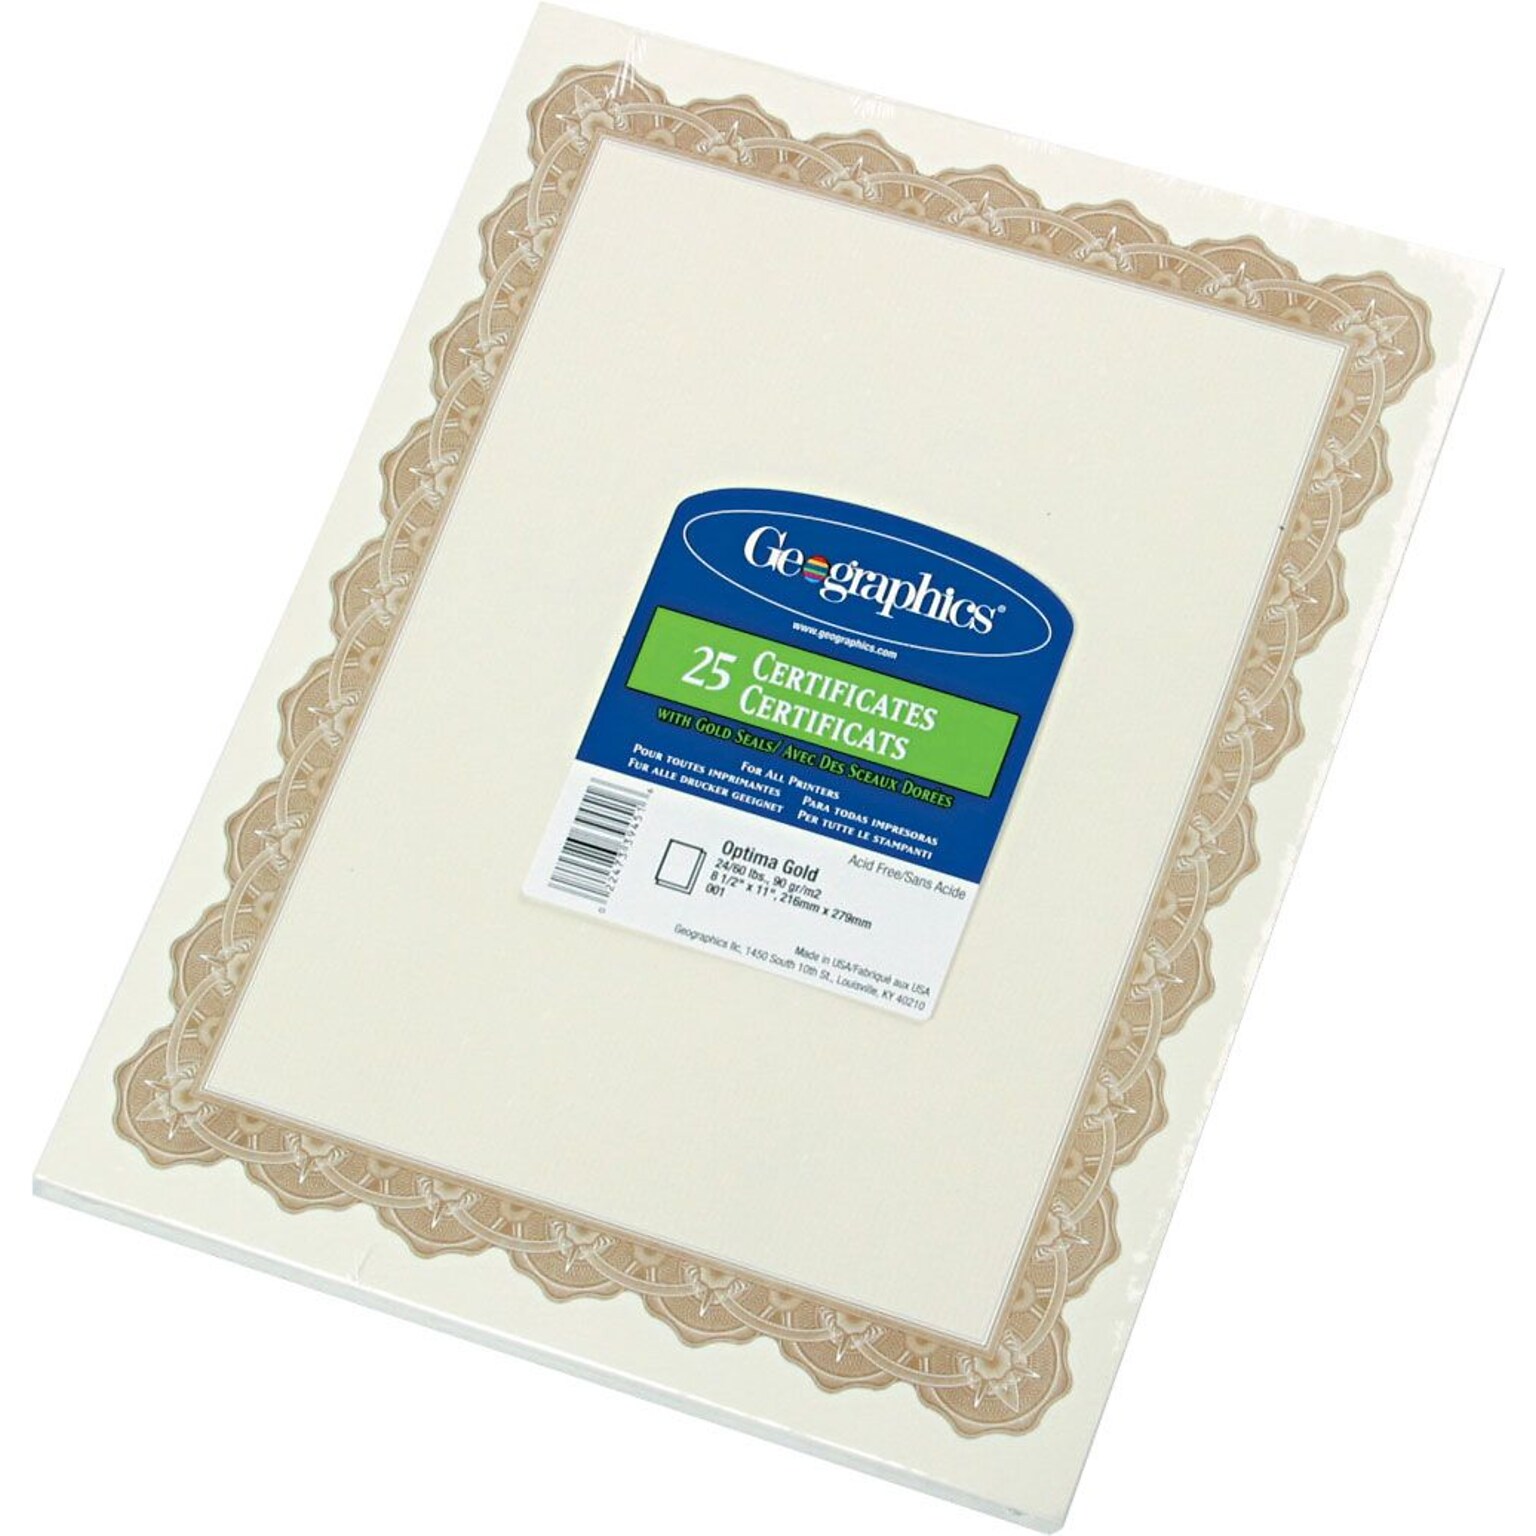 Geographics Certificates, 8.5 x 11, Gold, 25/Pack (39451S)